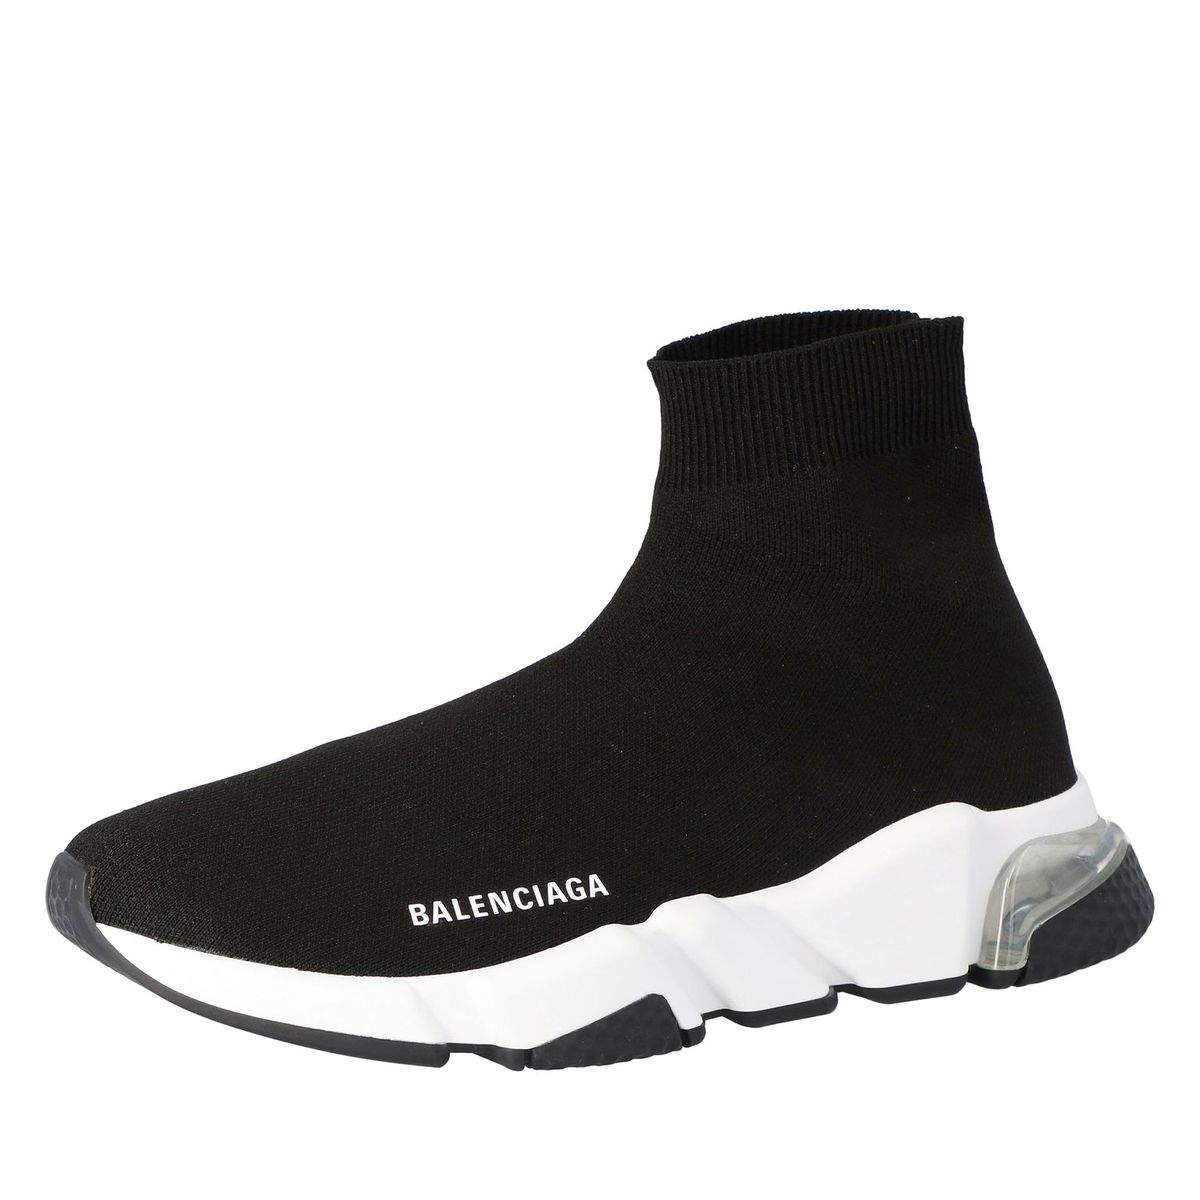 Balenciaga Black Knit Speed Clear Sole Sneakers Size 36